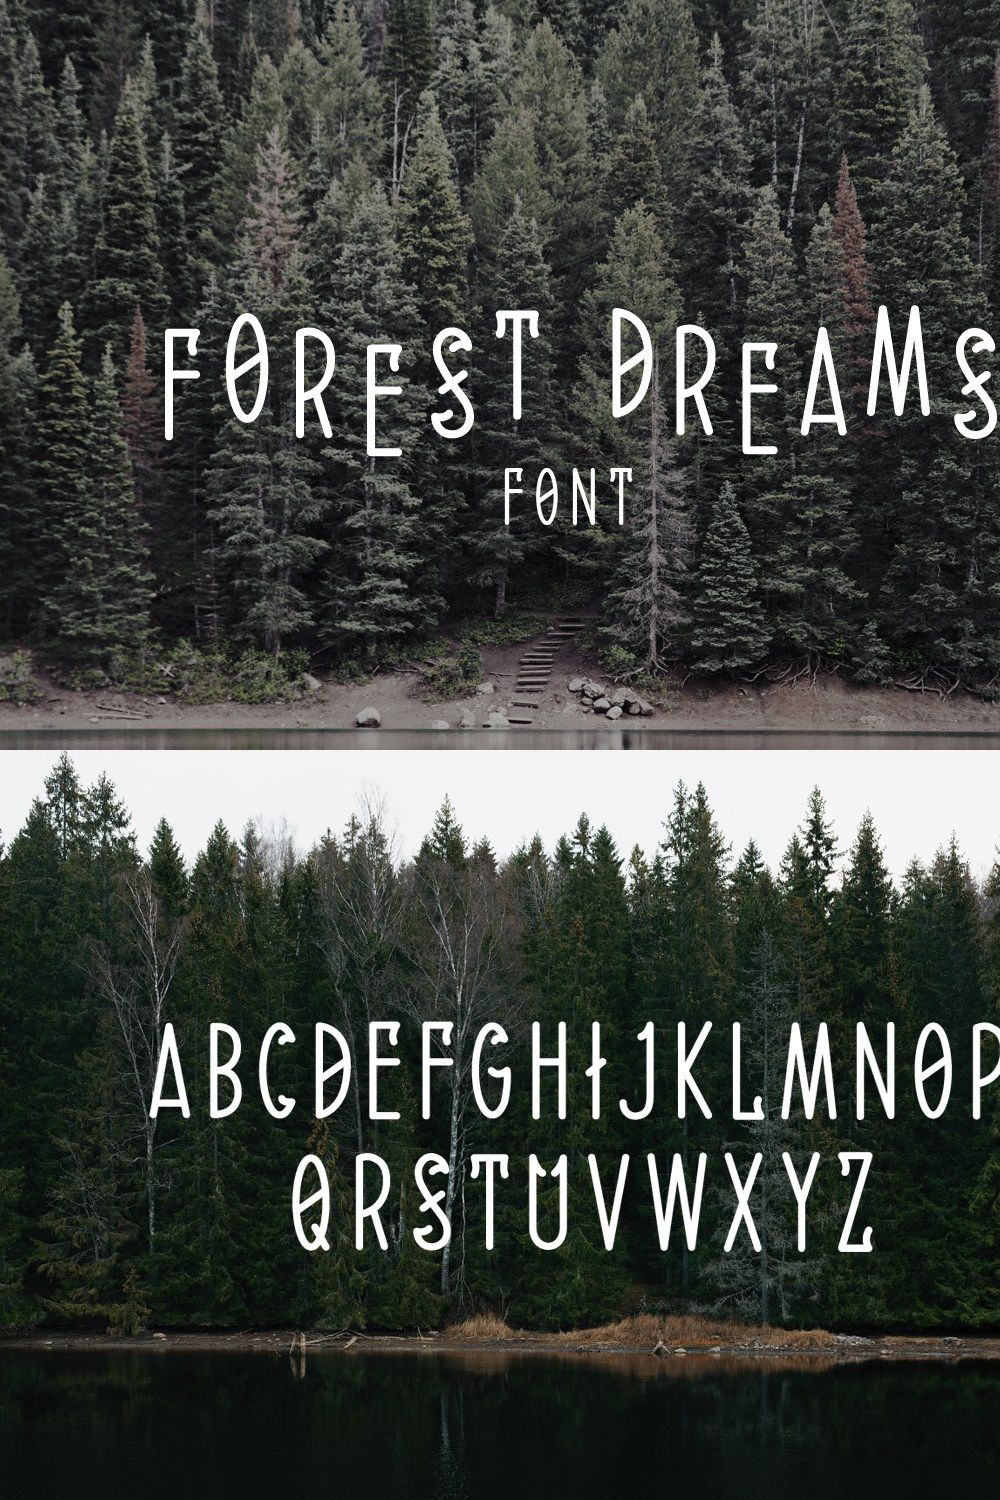 Forest Dreams pinterest preview image.